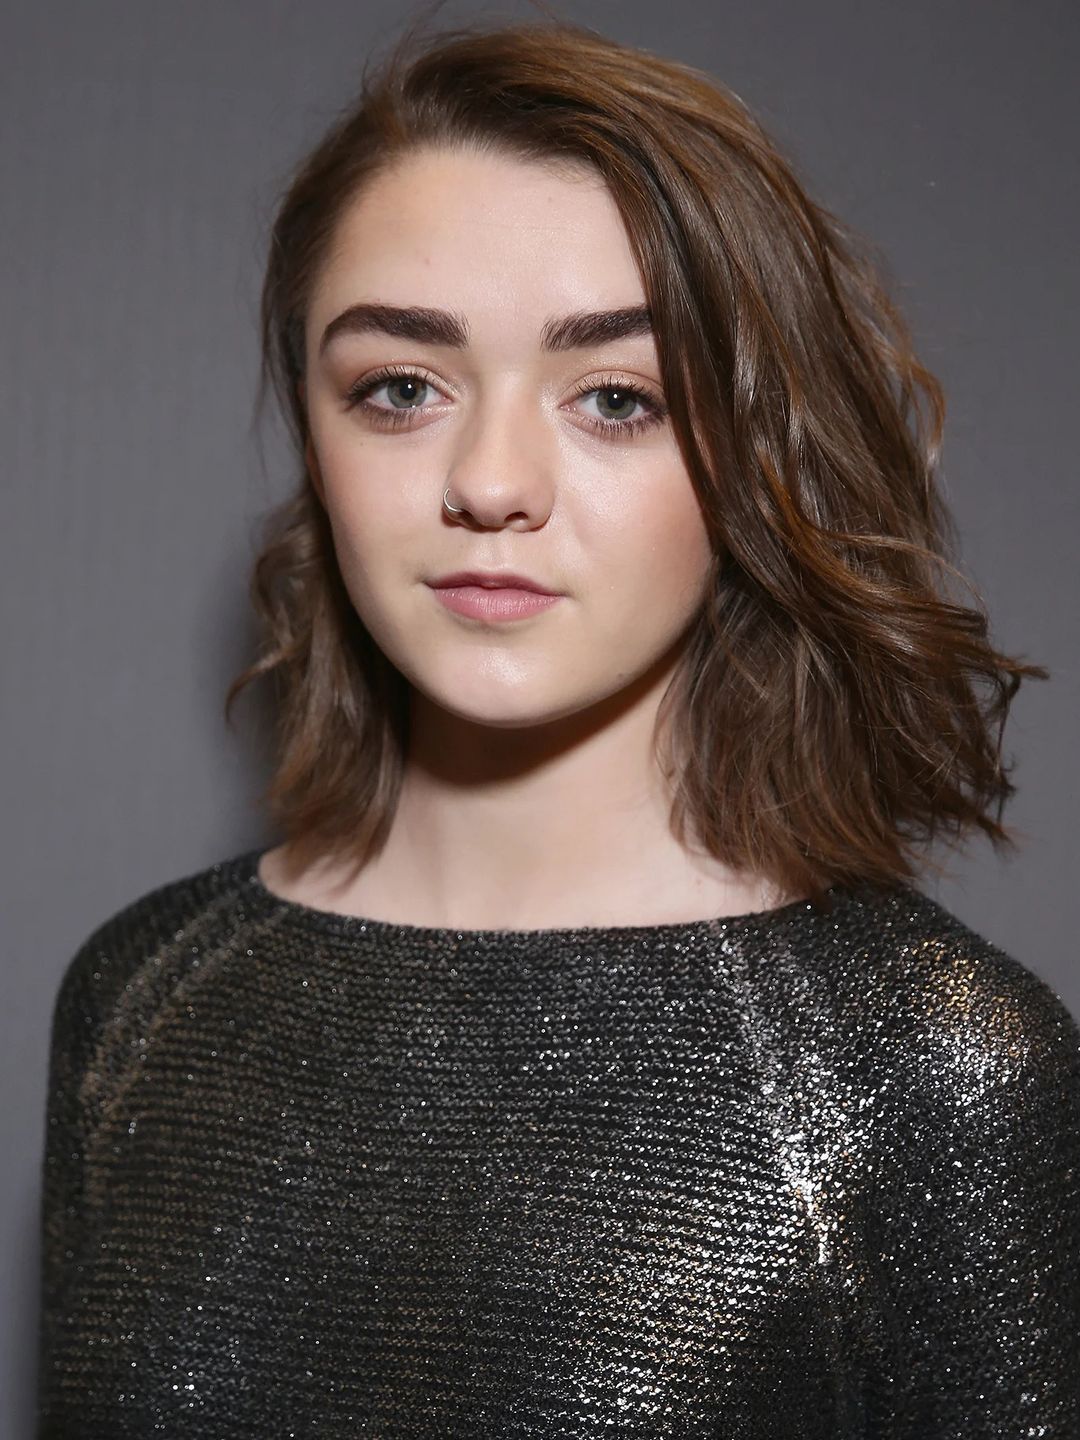 Maisie Williams who are her parents